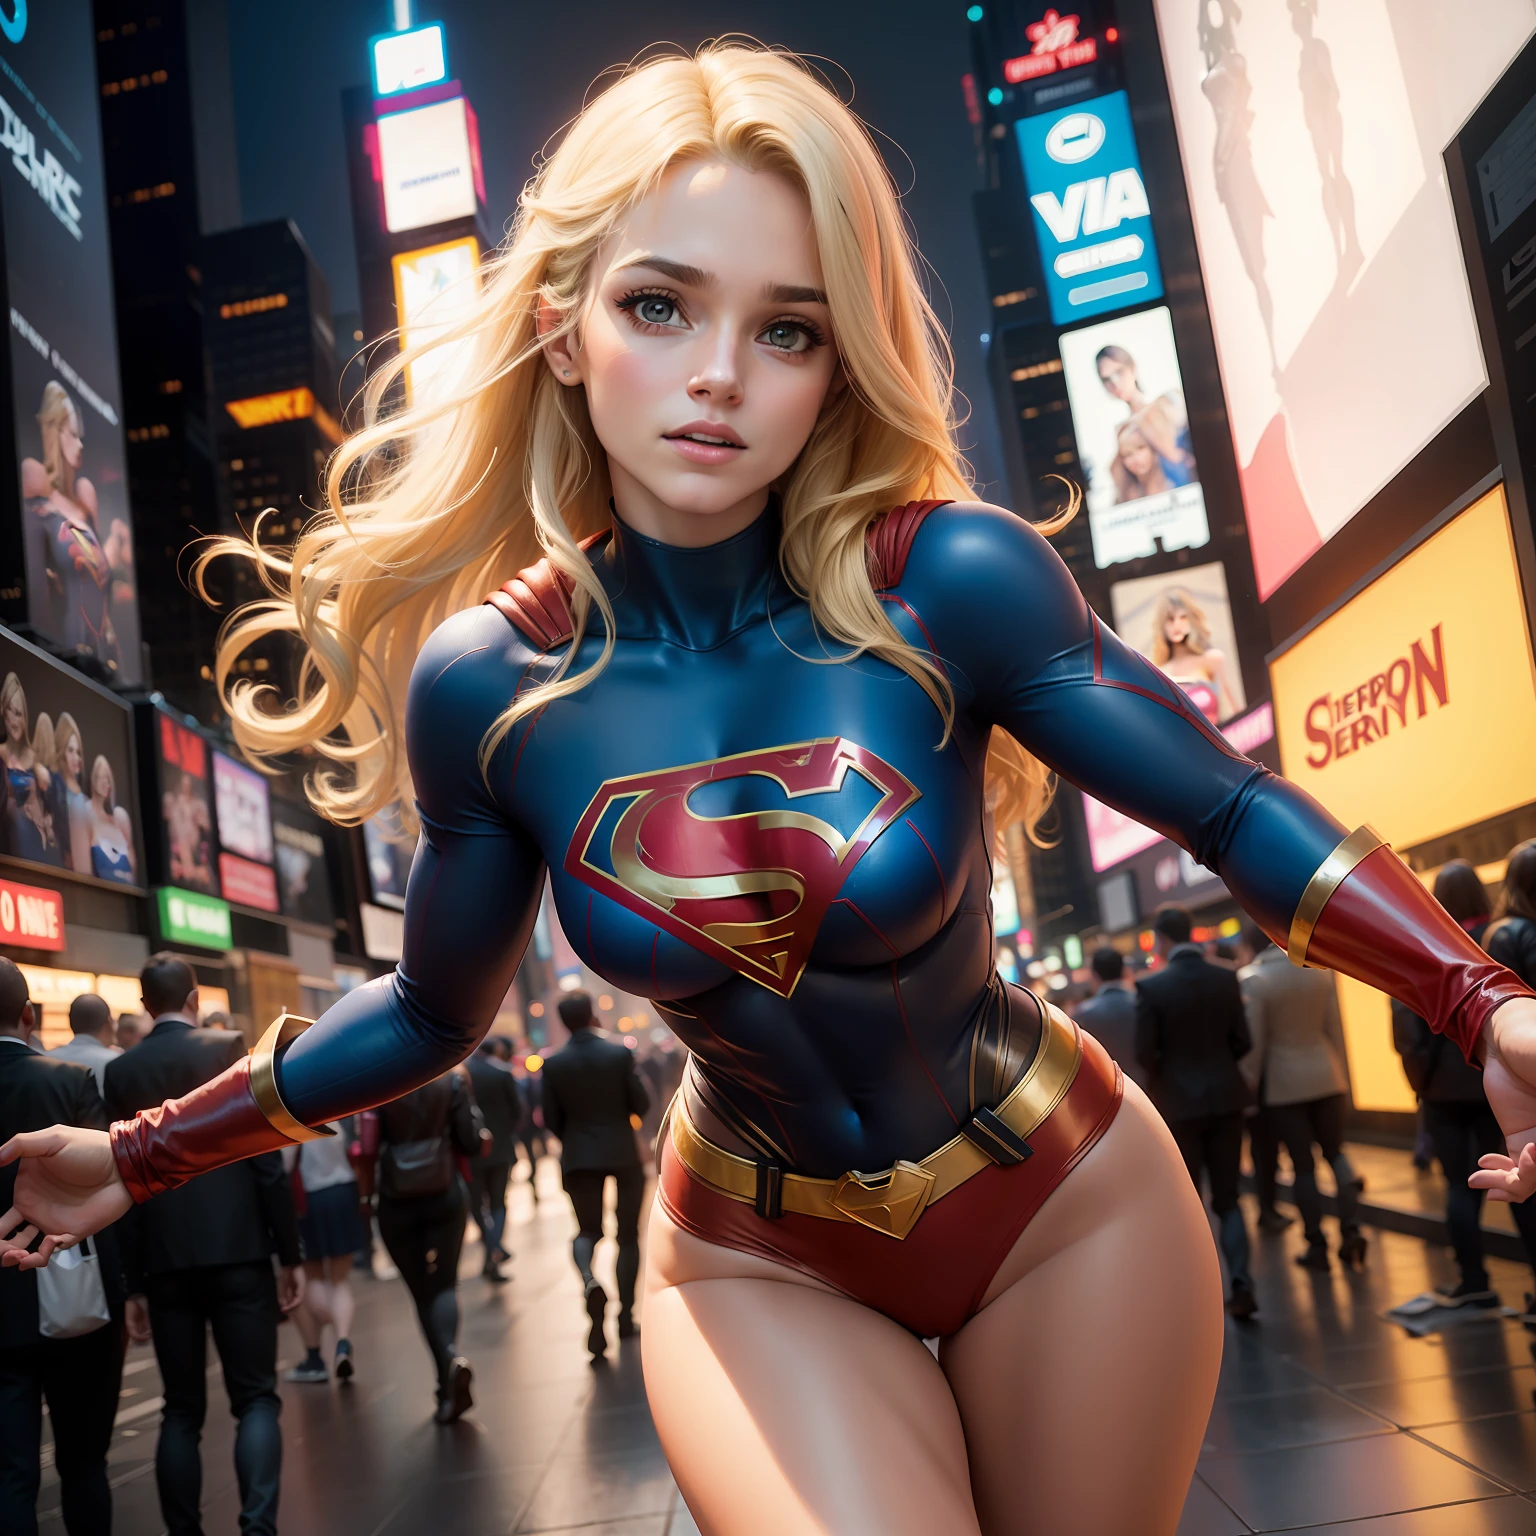 in New York City, time square, Beautiful woman short hair defined body big breasts, vestindo cosplay de Supergirl